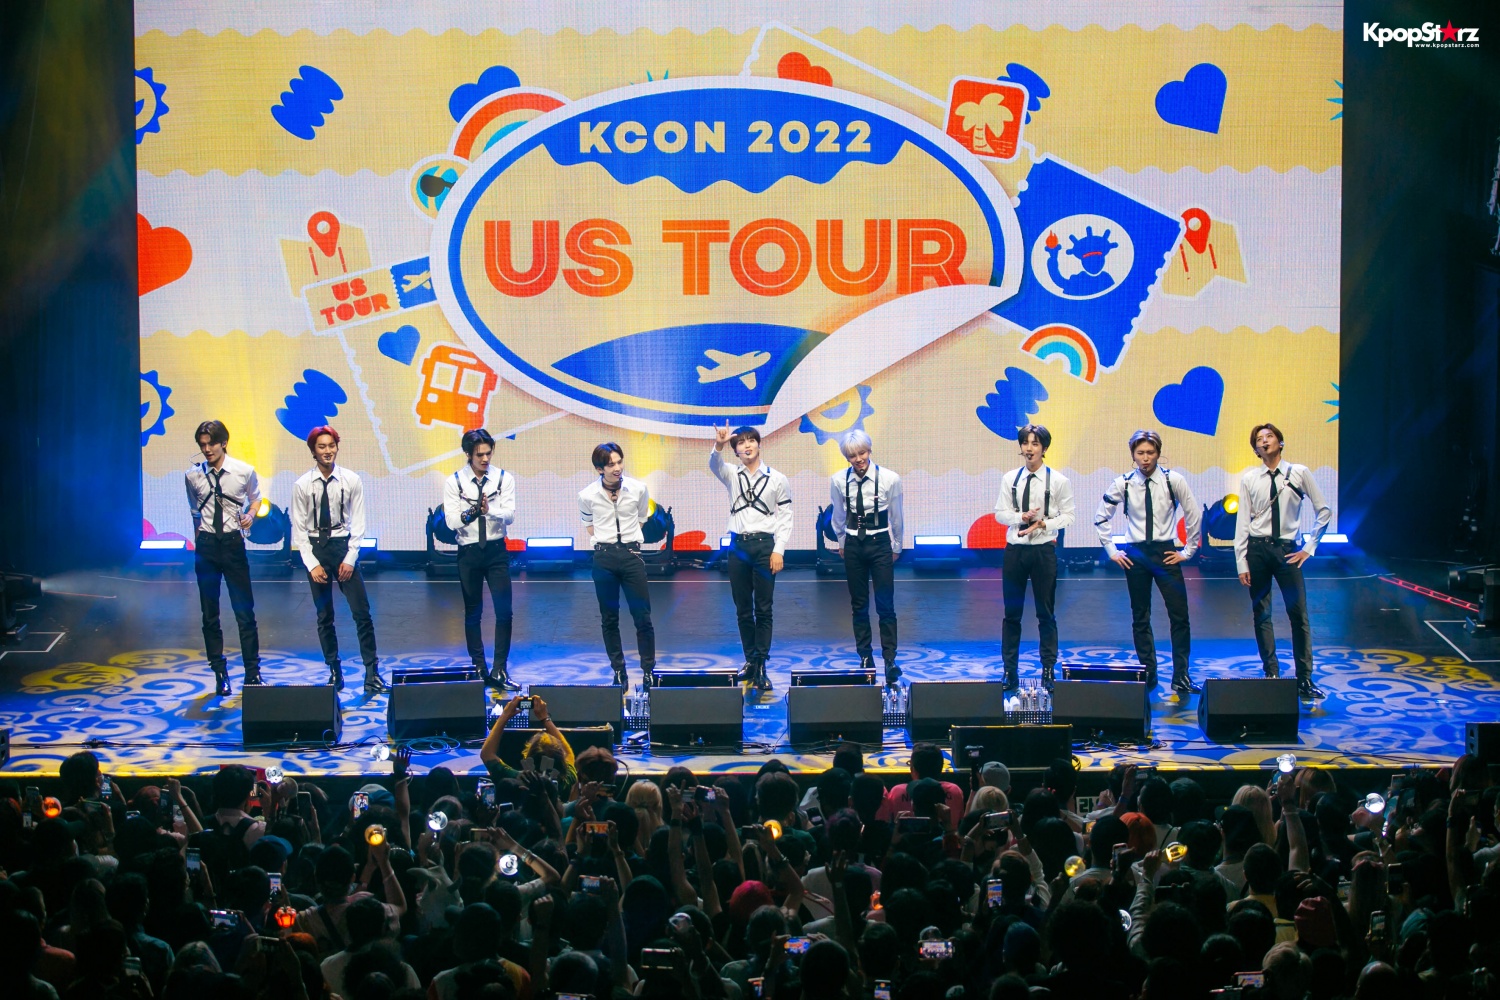 Our Newest Idols Take On New York! — KCON 2022 US Tour! 